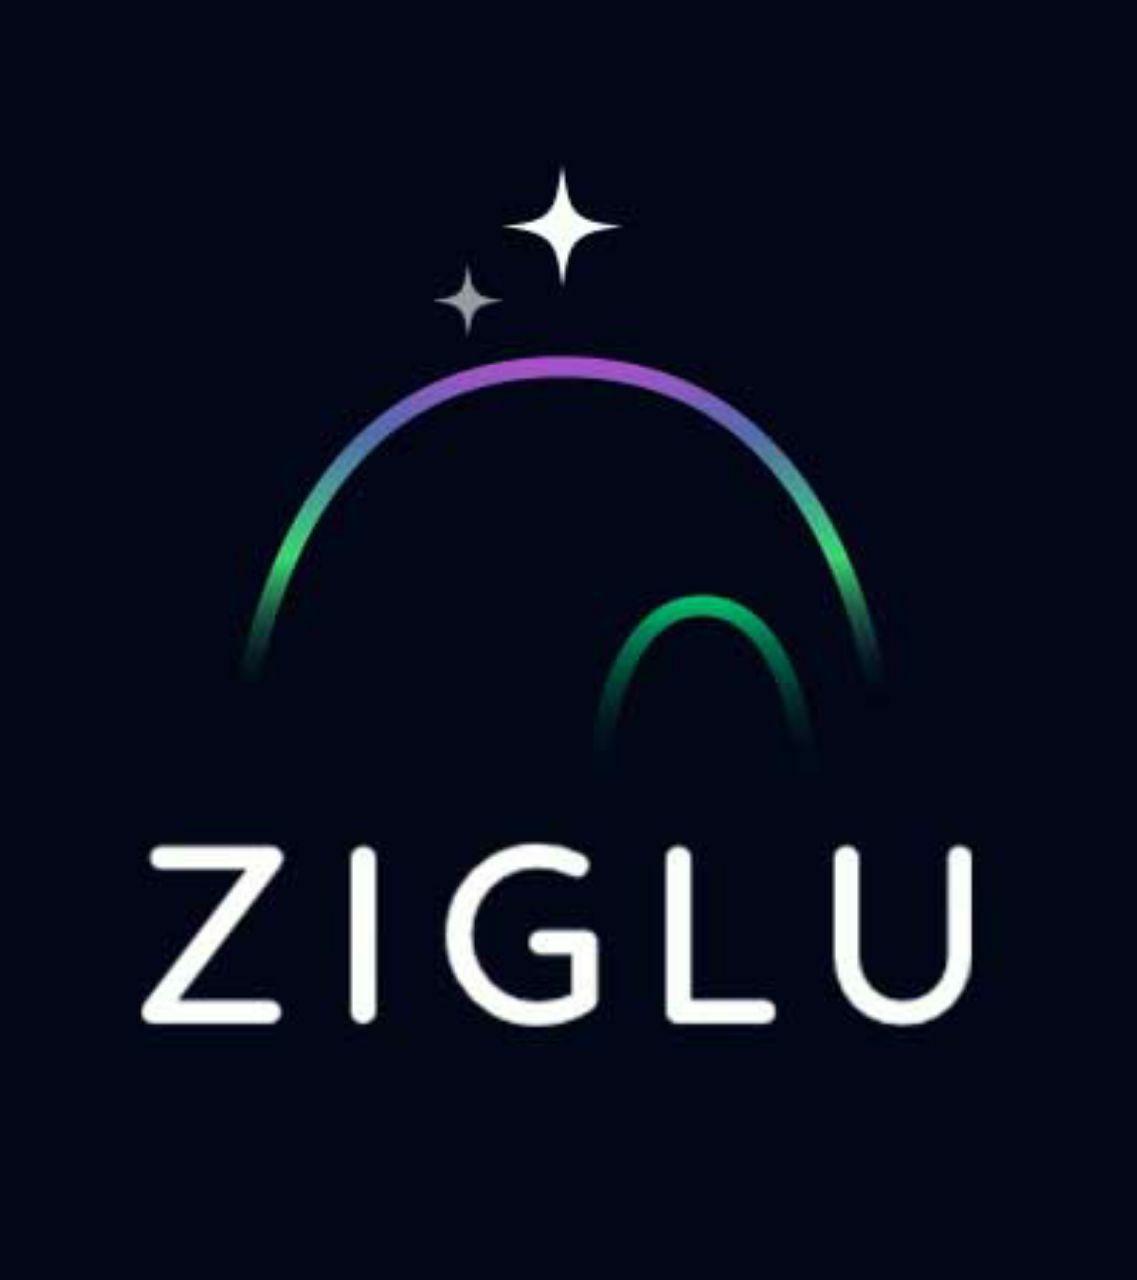 Ziglu secures £5.25 million seed funding to provide transparent and simple access to cryptocurrency